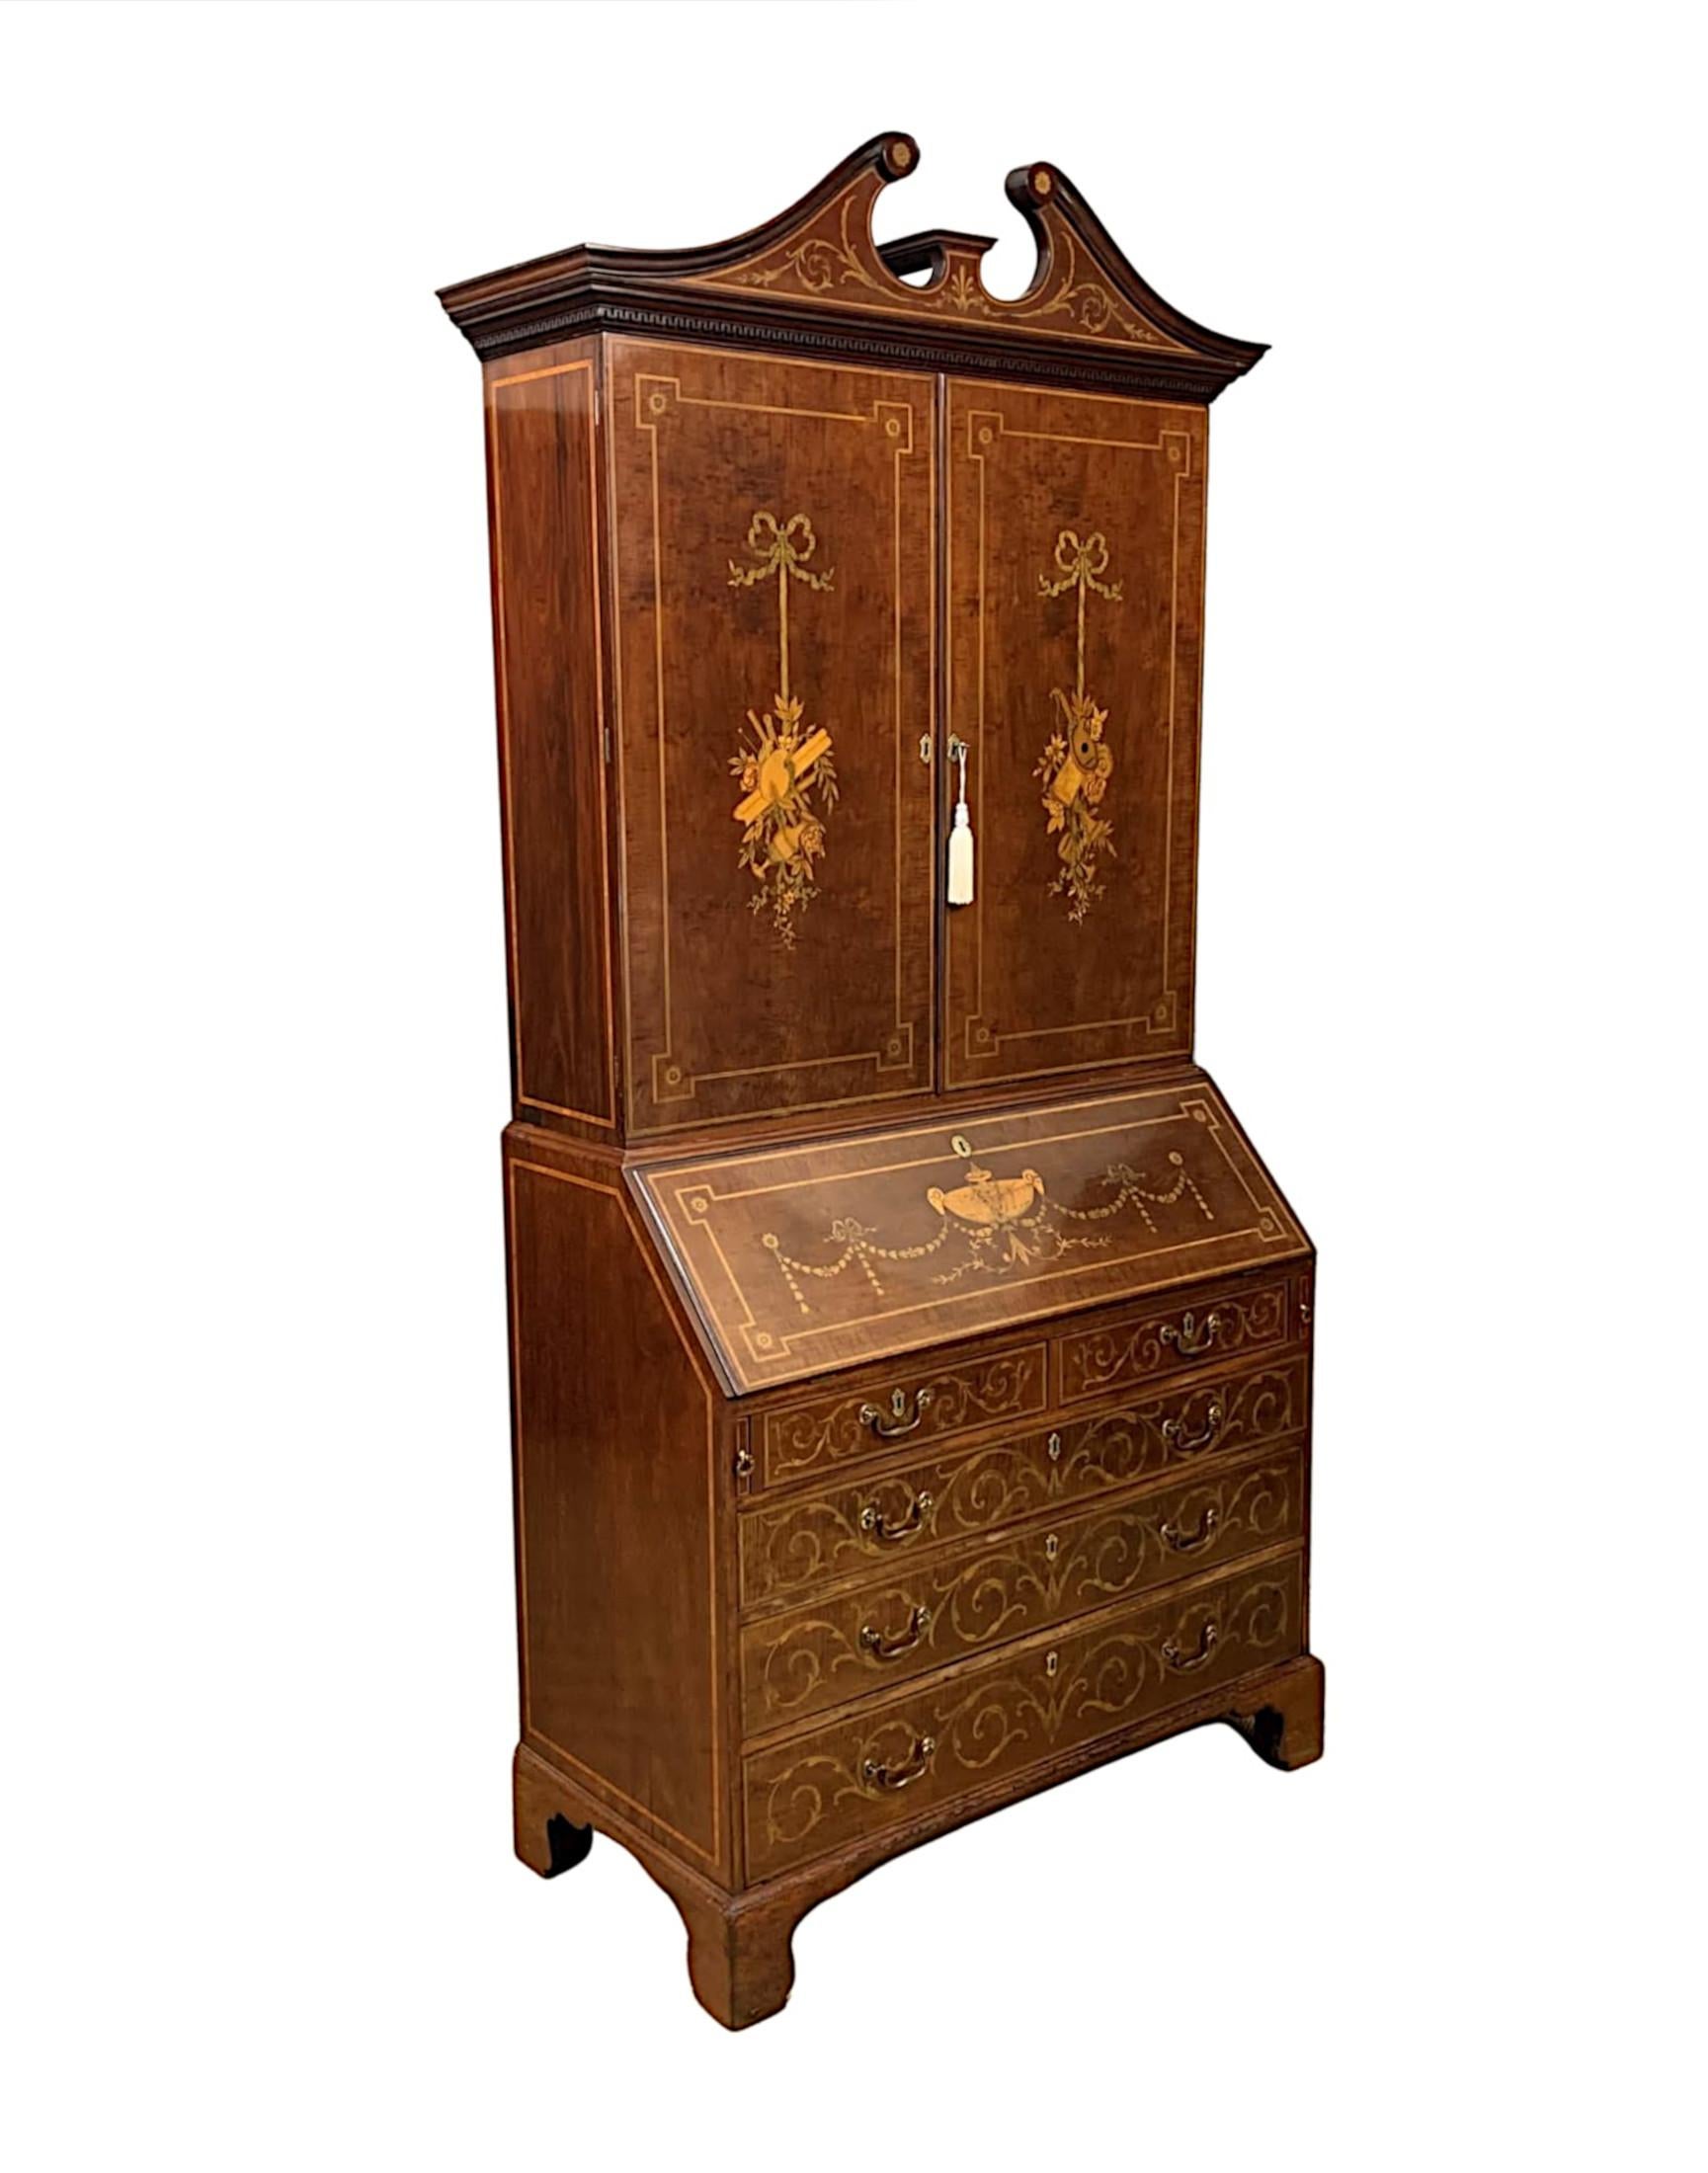 A very rare and fine early 19th century Georgian mahogany bureau bookcase, line inlaid throughout and with intricate marquetry depicting Neoclassical motifs of swags, garlands, flower heads and scrolling detail. The moulded stepped broken swan neck